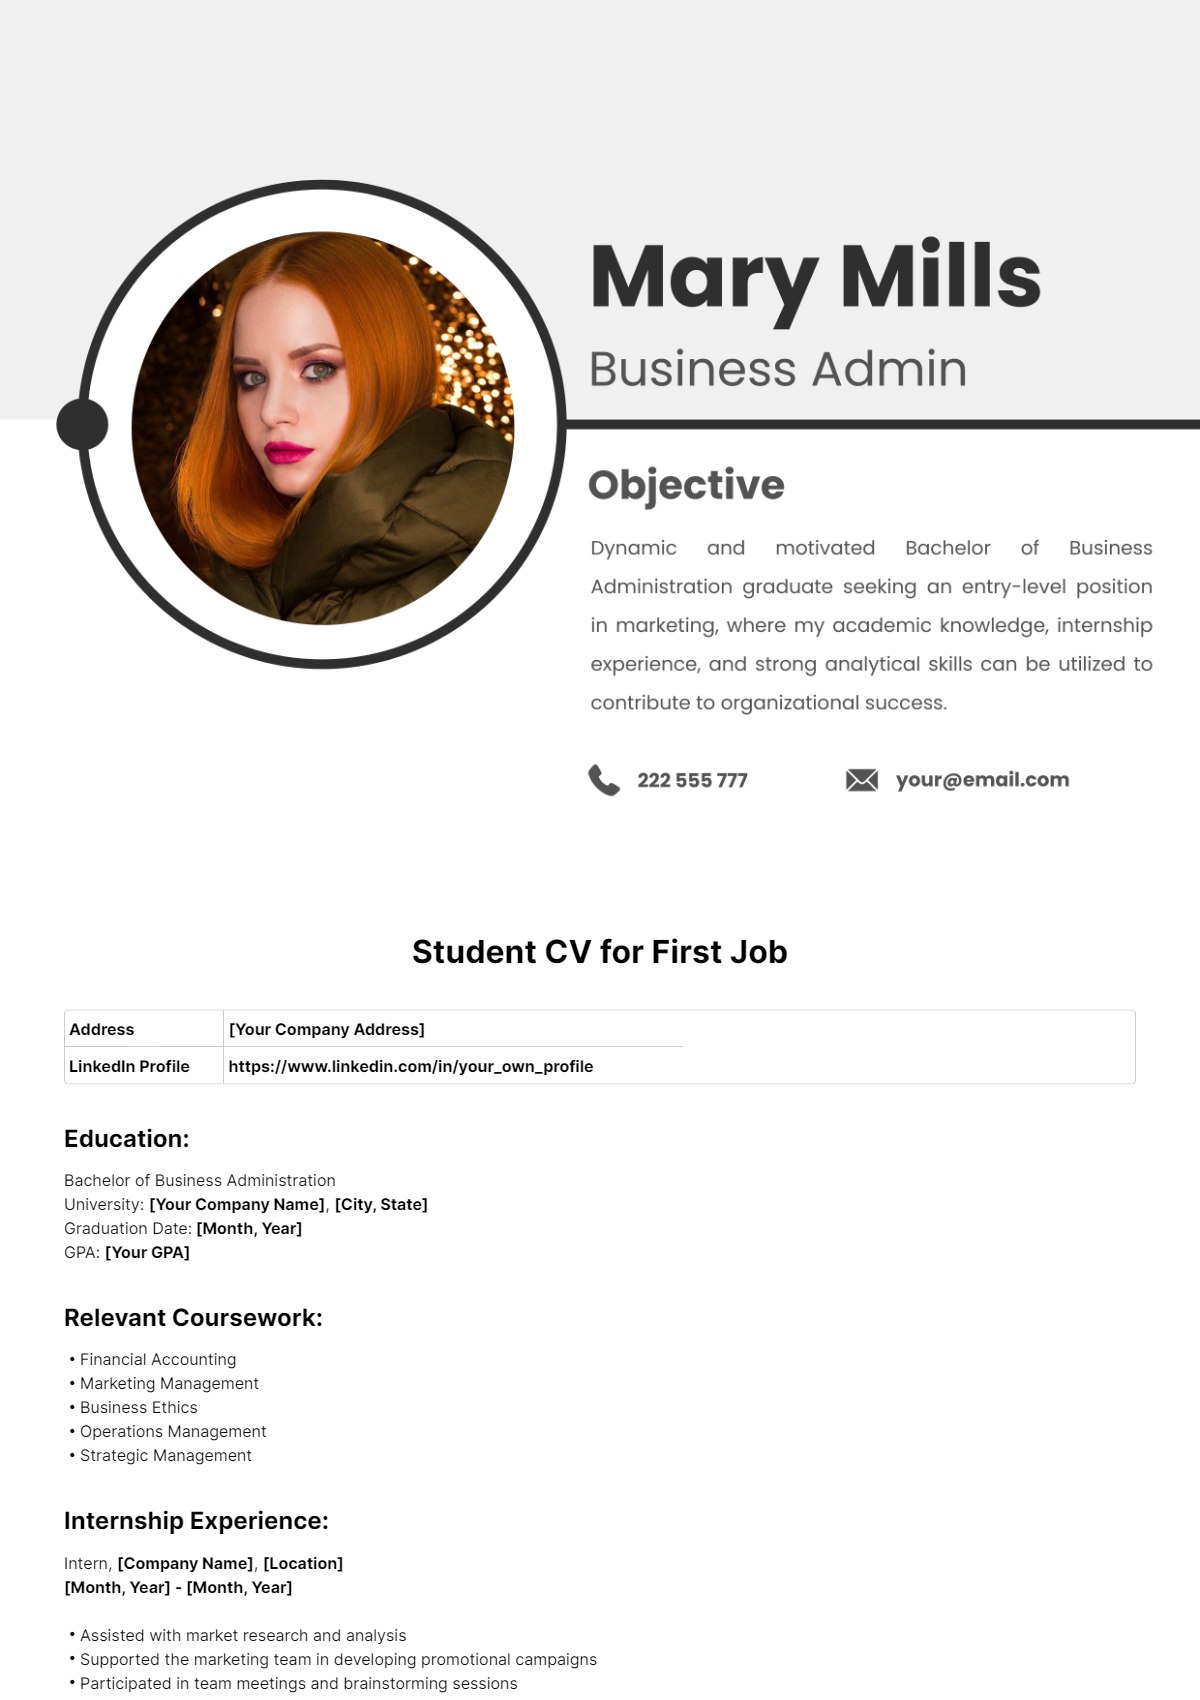 Student CV for First Job Template